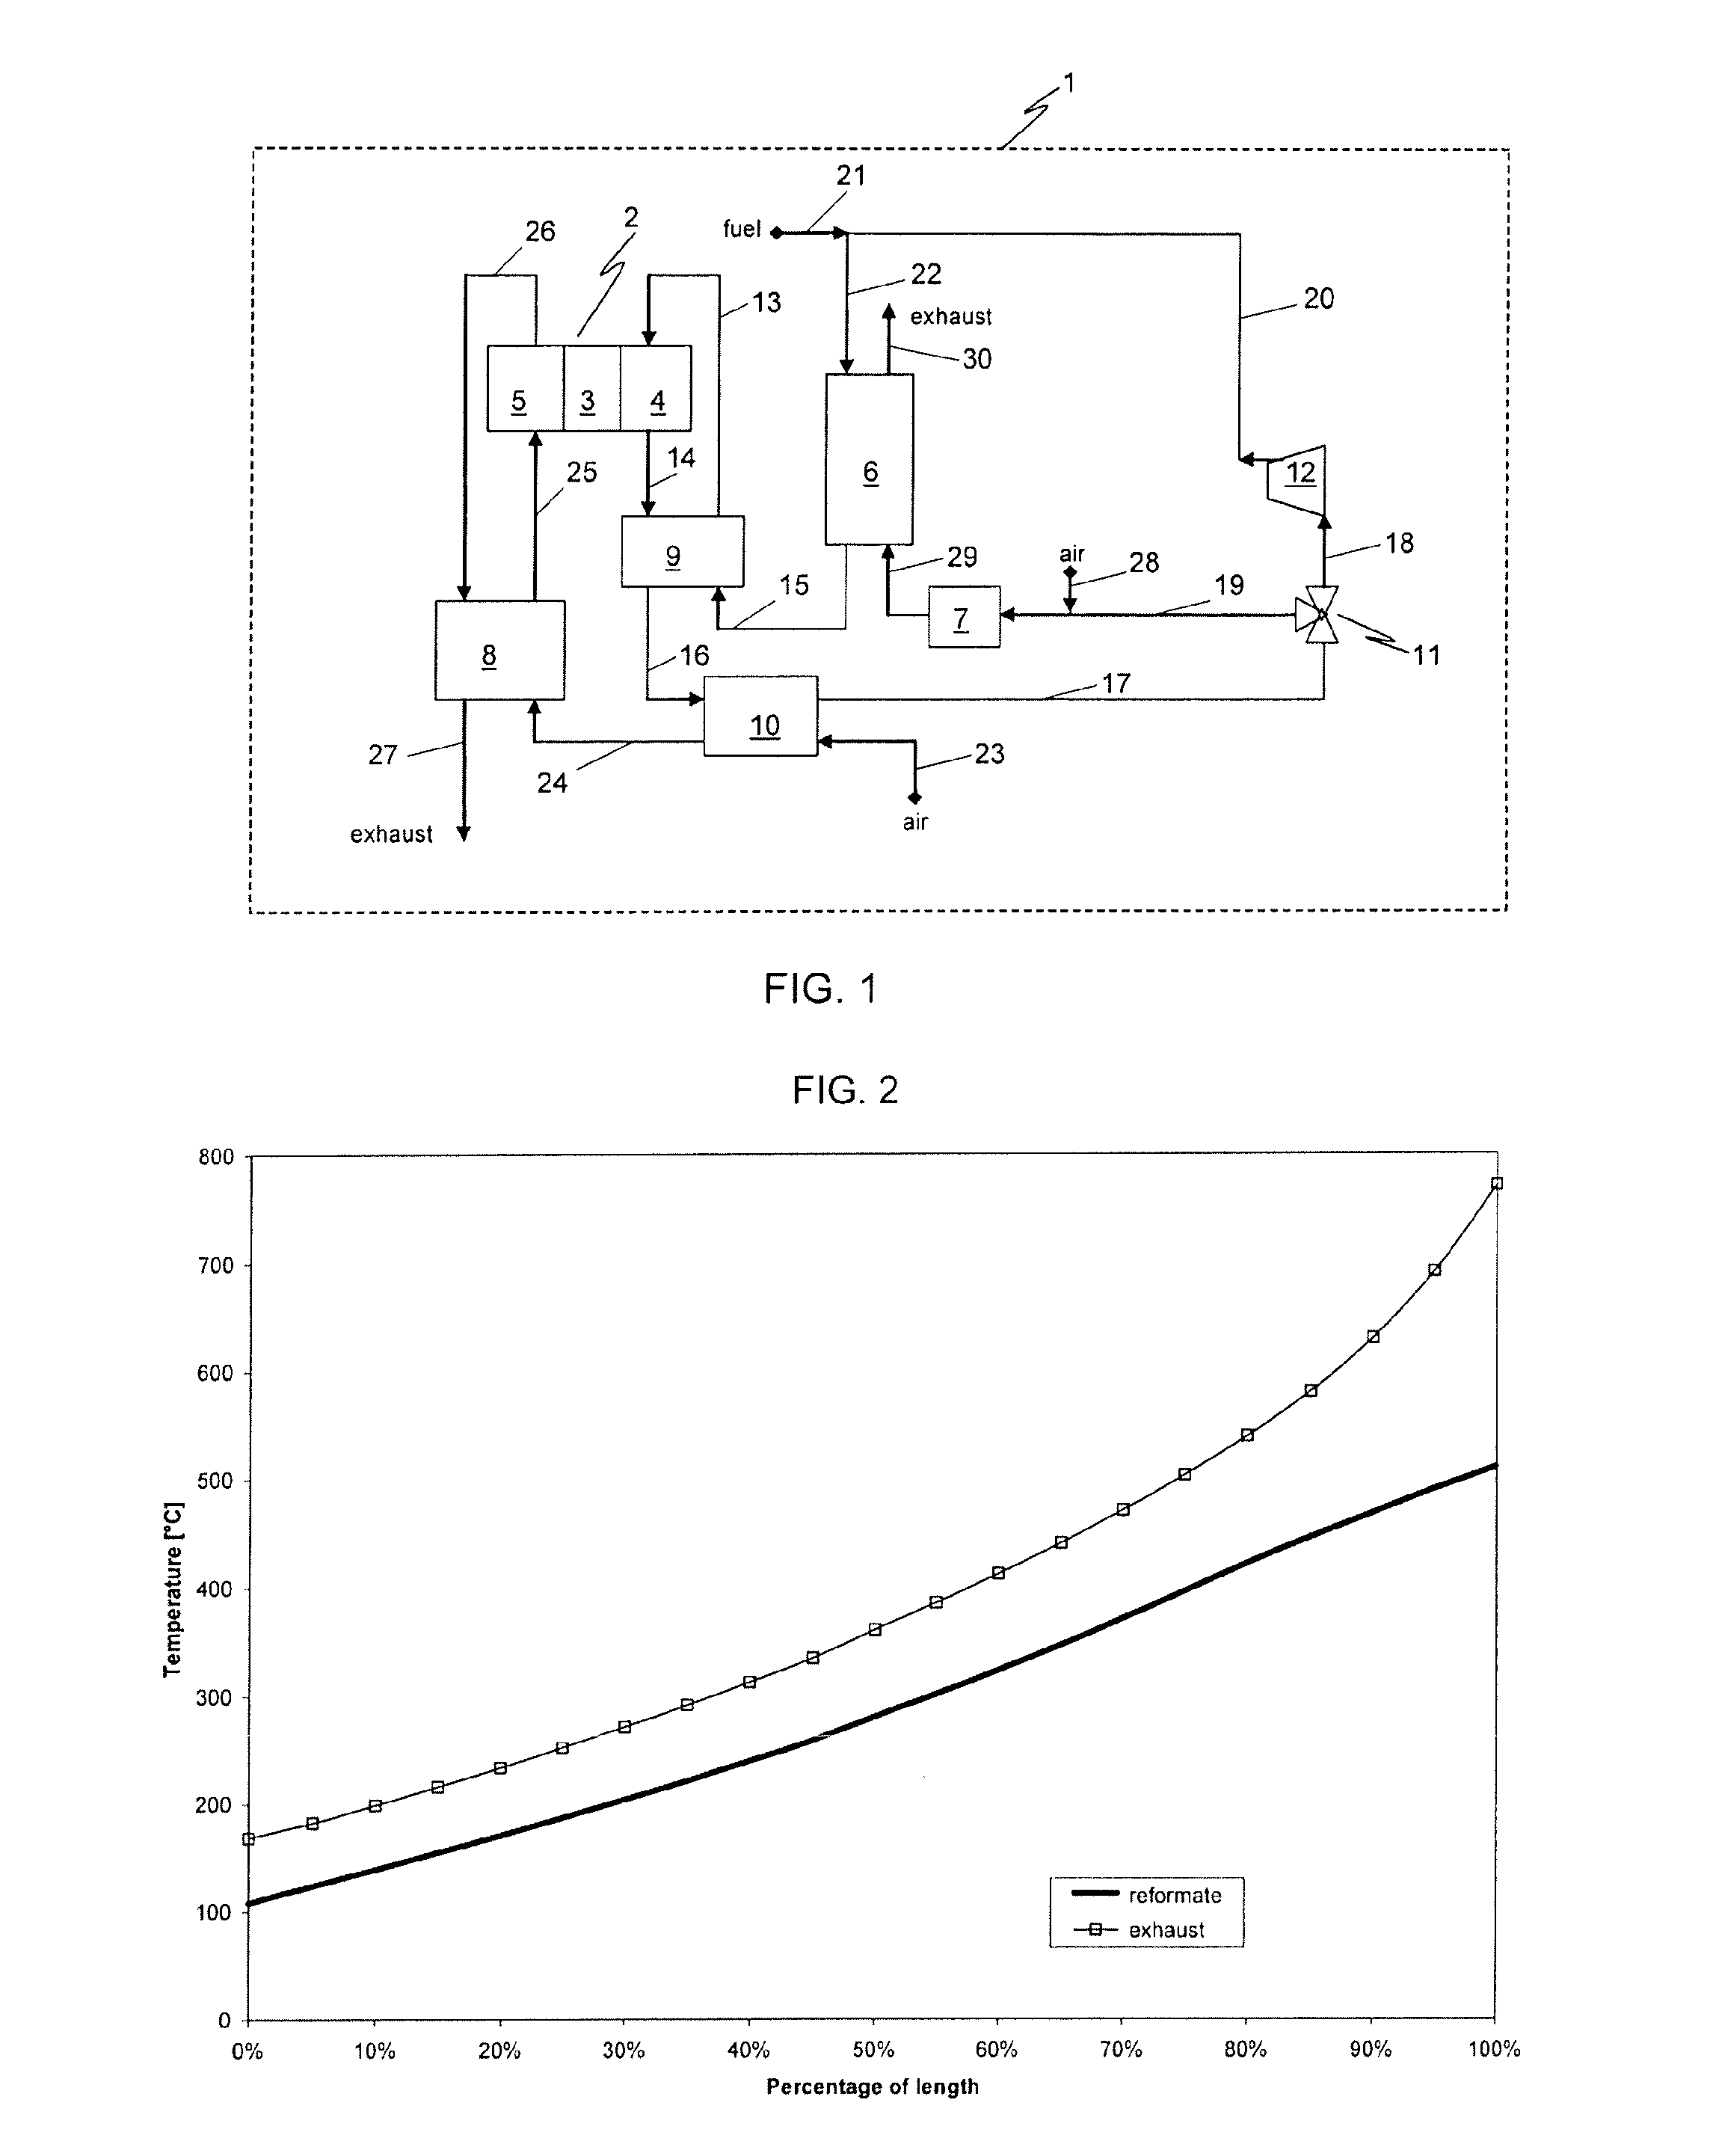 Fuel cell system with partial external reforming and direct internal reforming